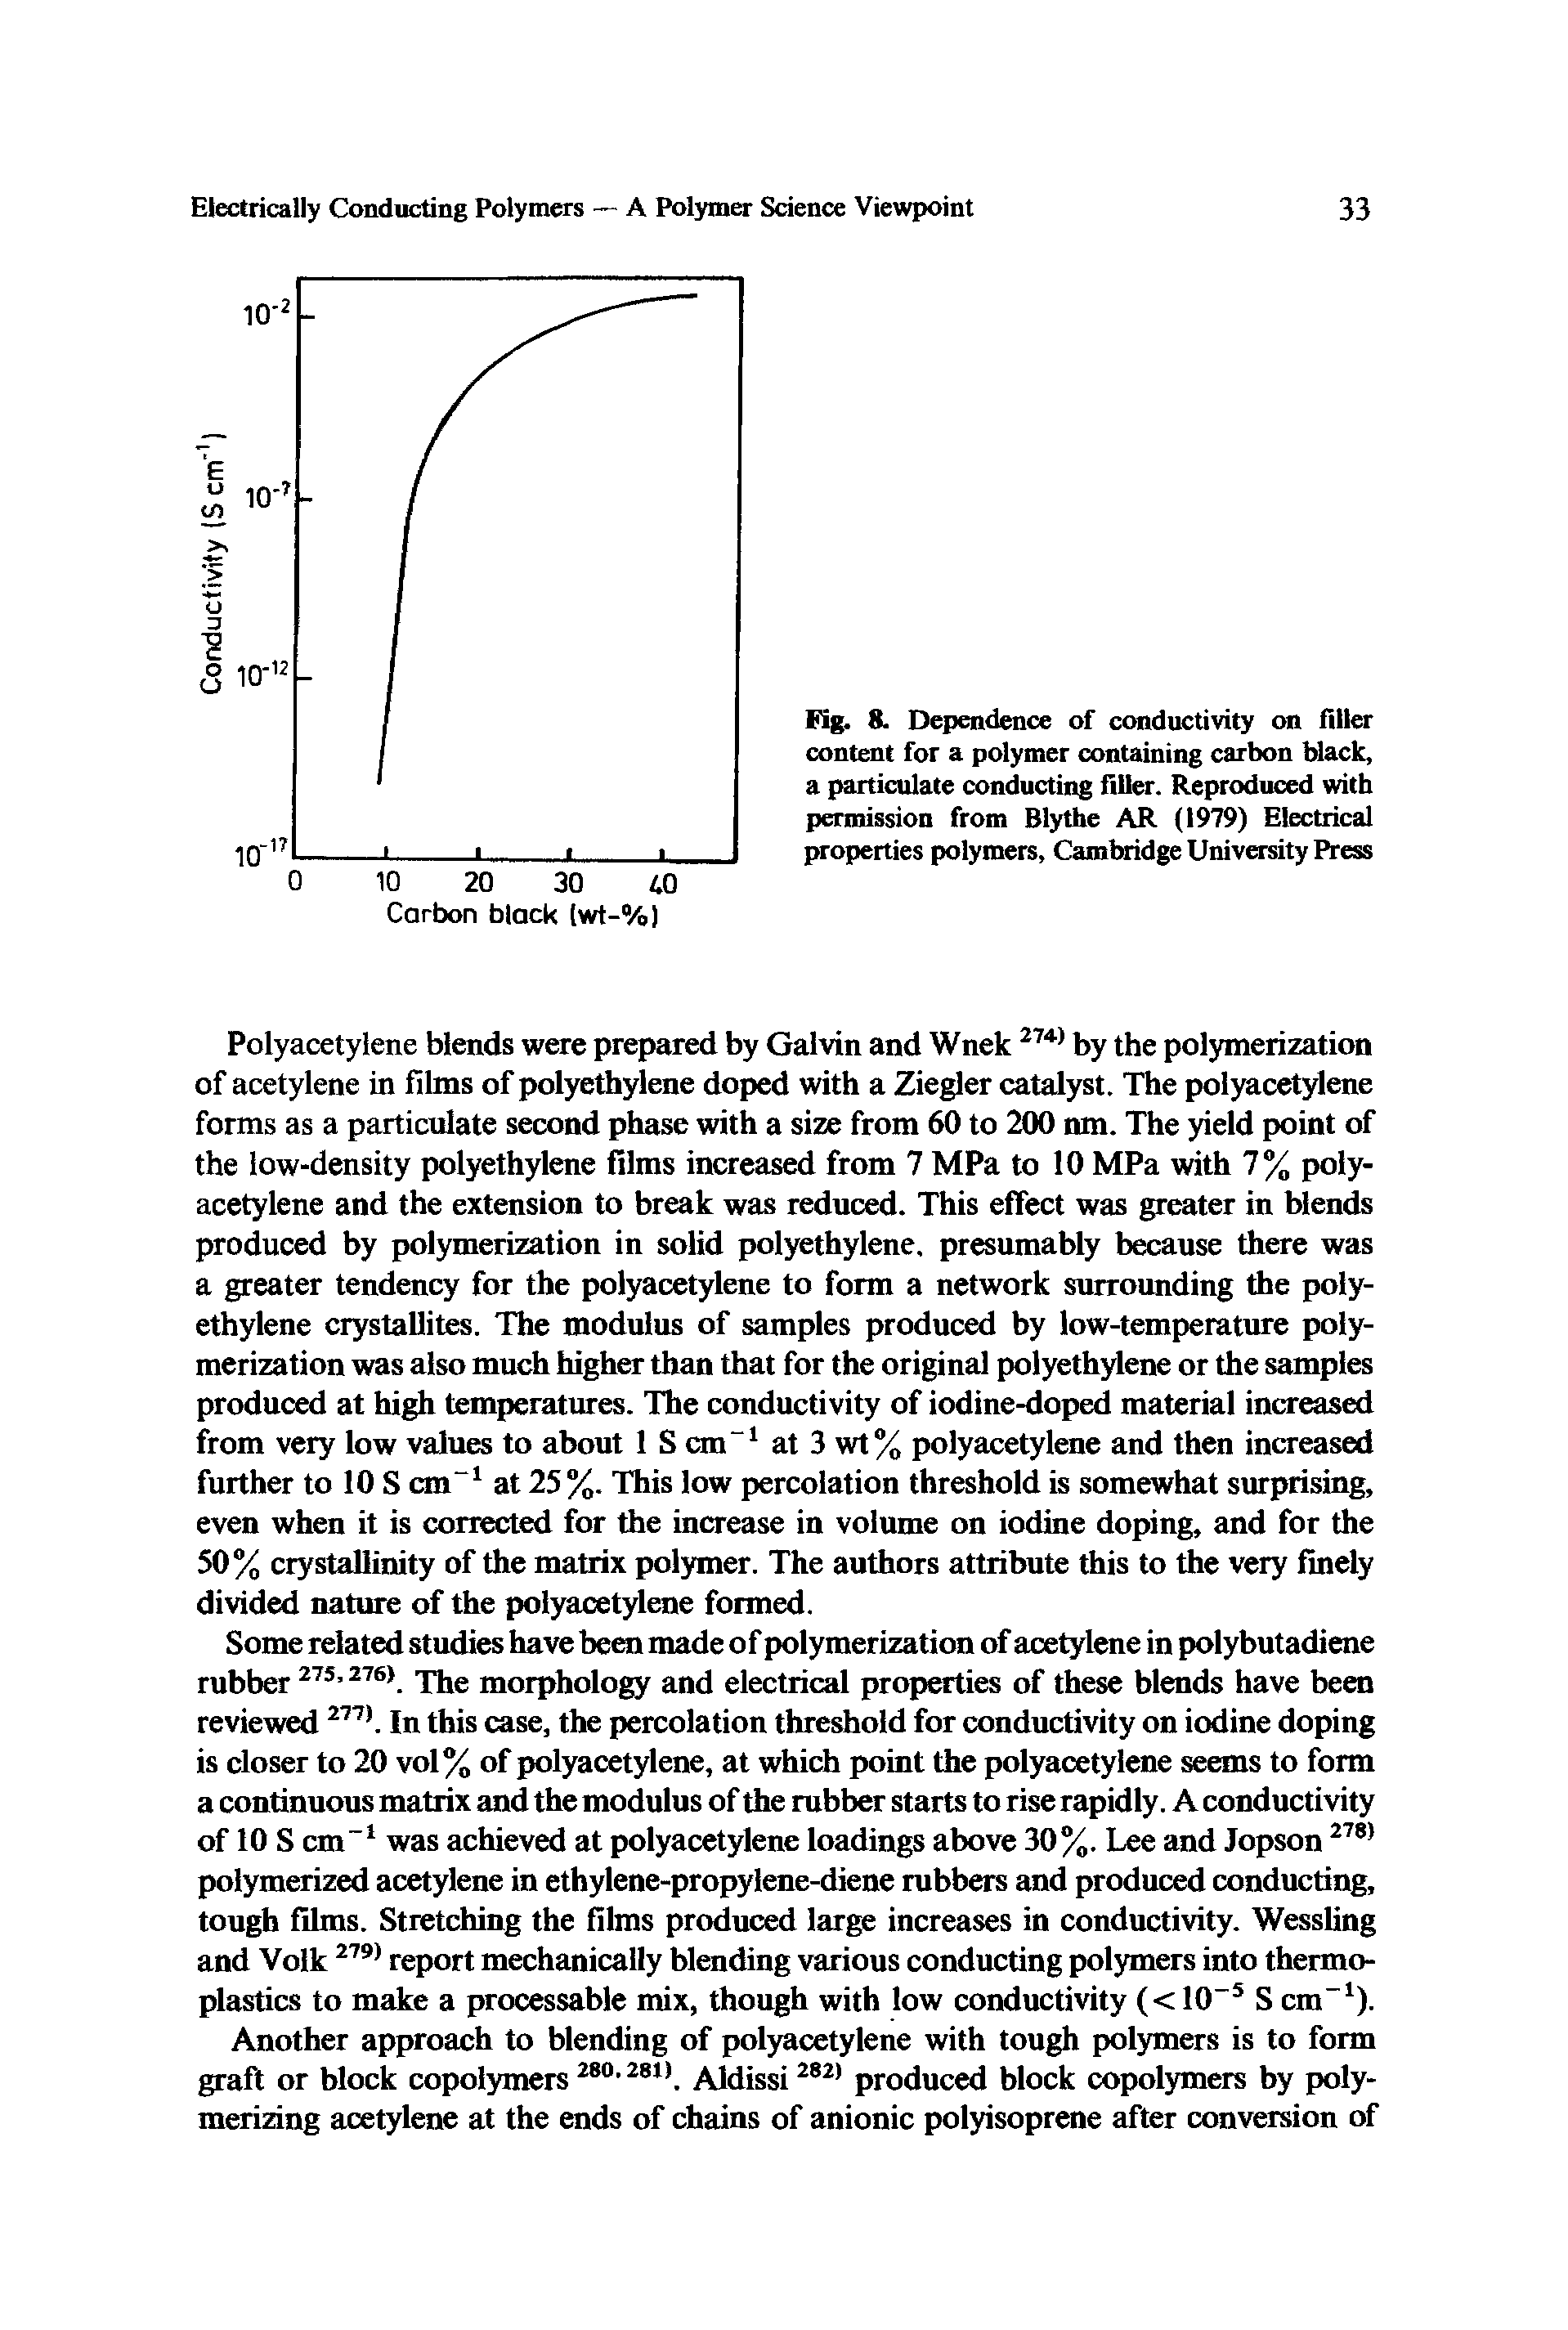 Fig. 8. Dependence of conductivity on filler content for a polymer containing carbon black, a particulate conducting filler. Reproduced with permission from Blythe AR (1979) Electrical properties polymers, Cambridge University Press...